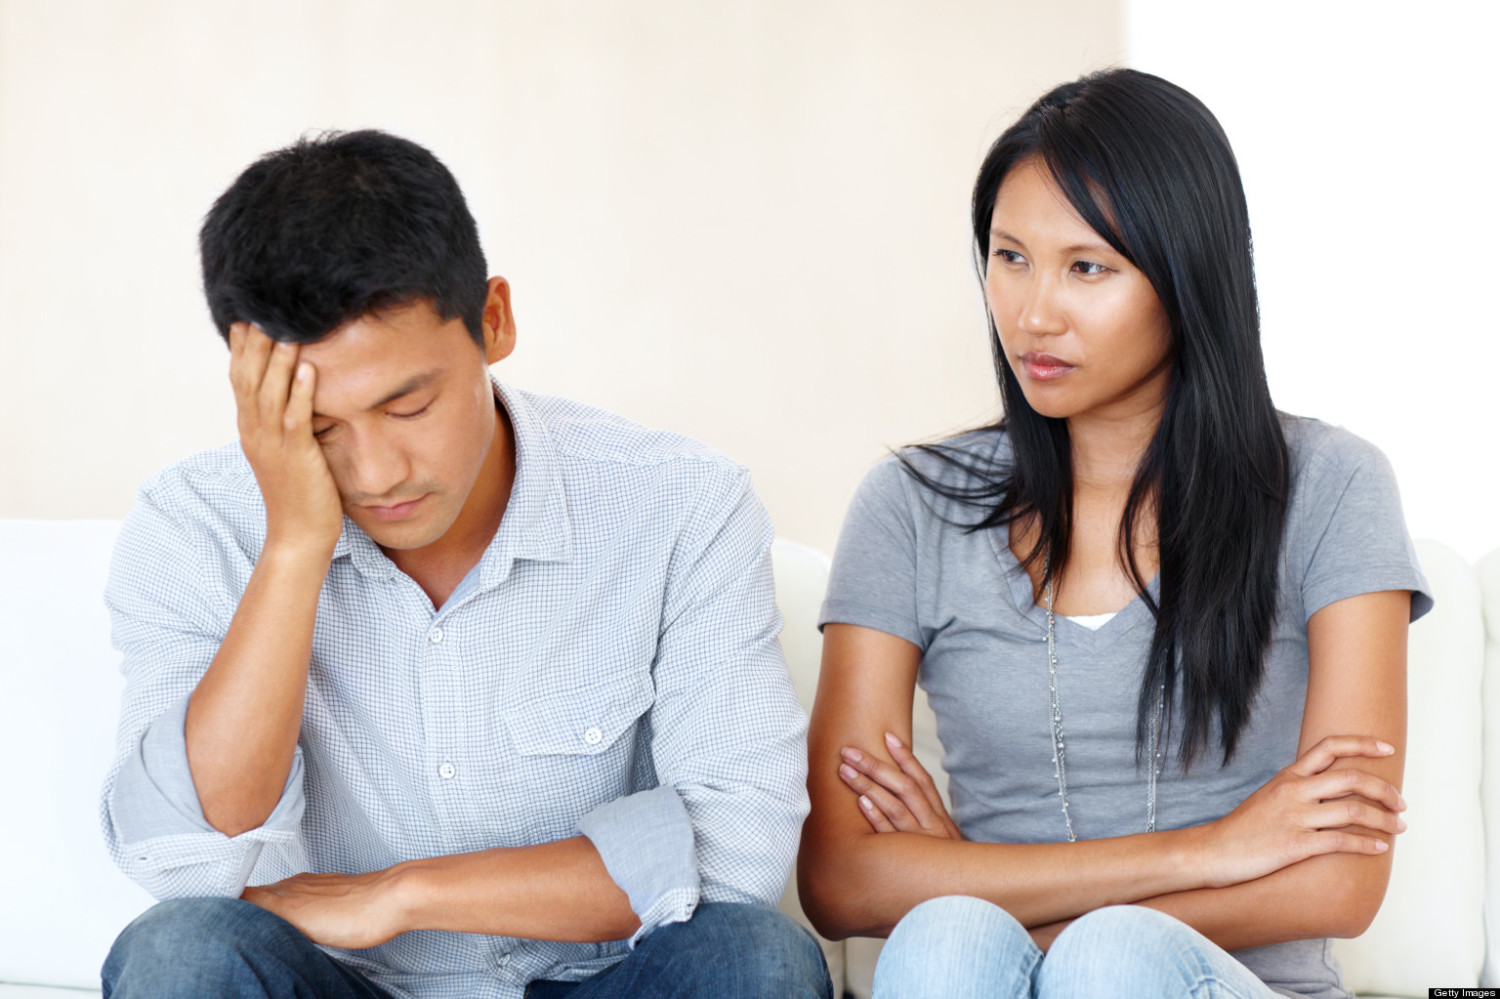 relationship counselling online free india